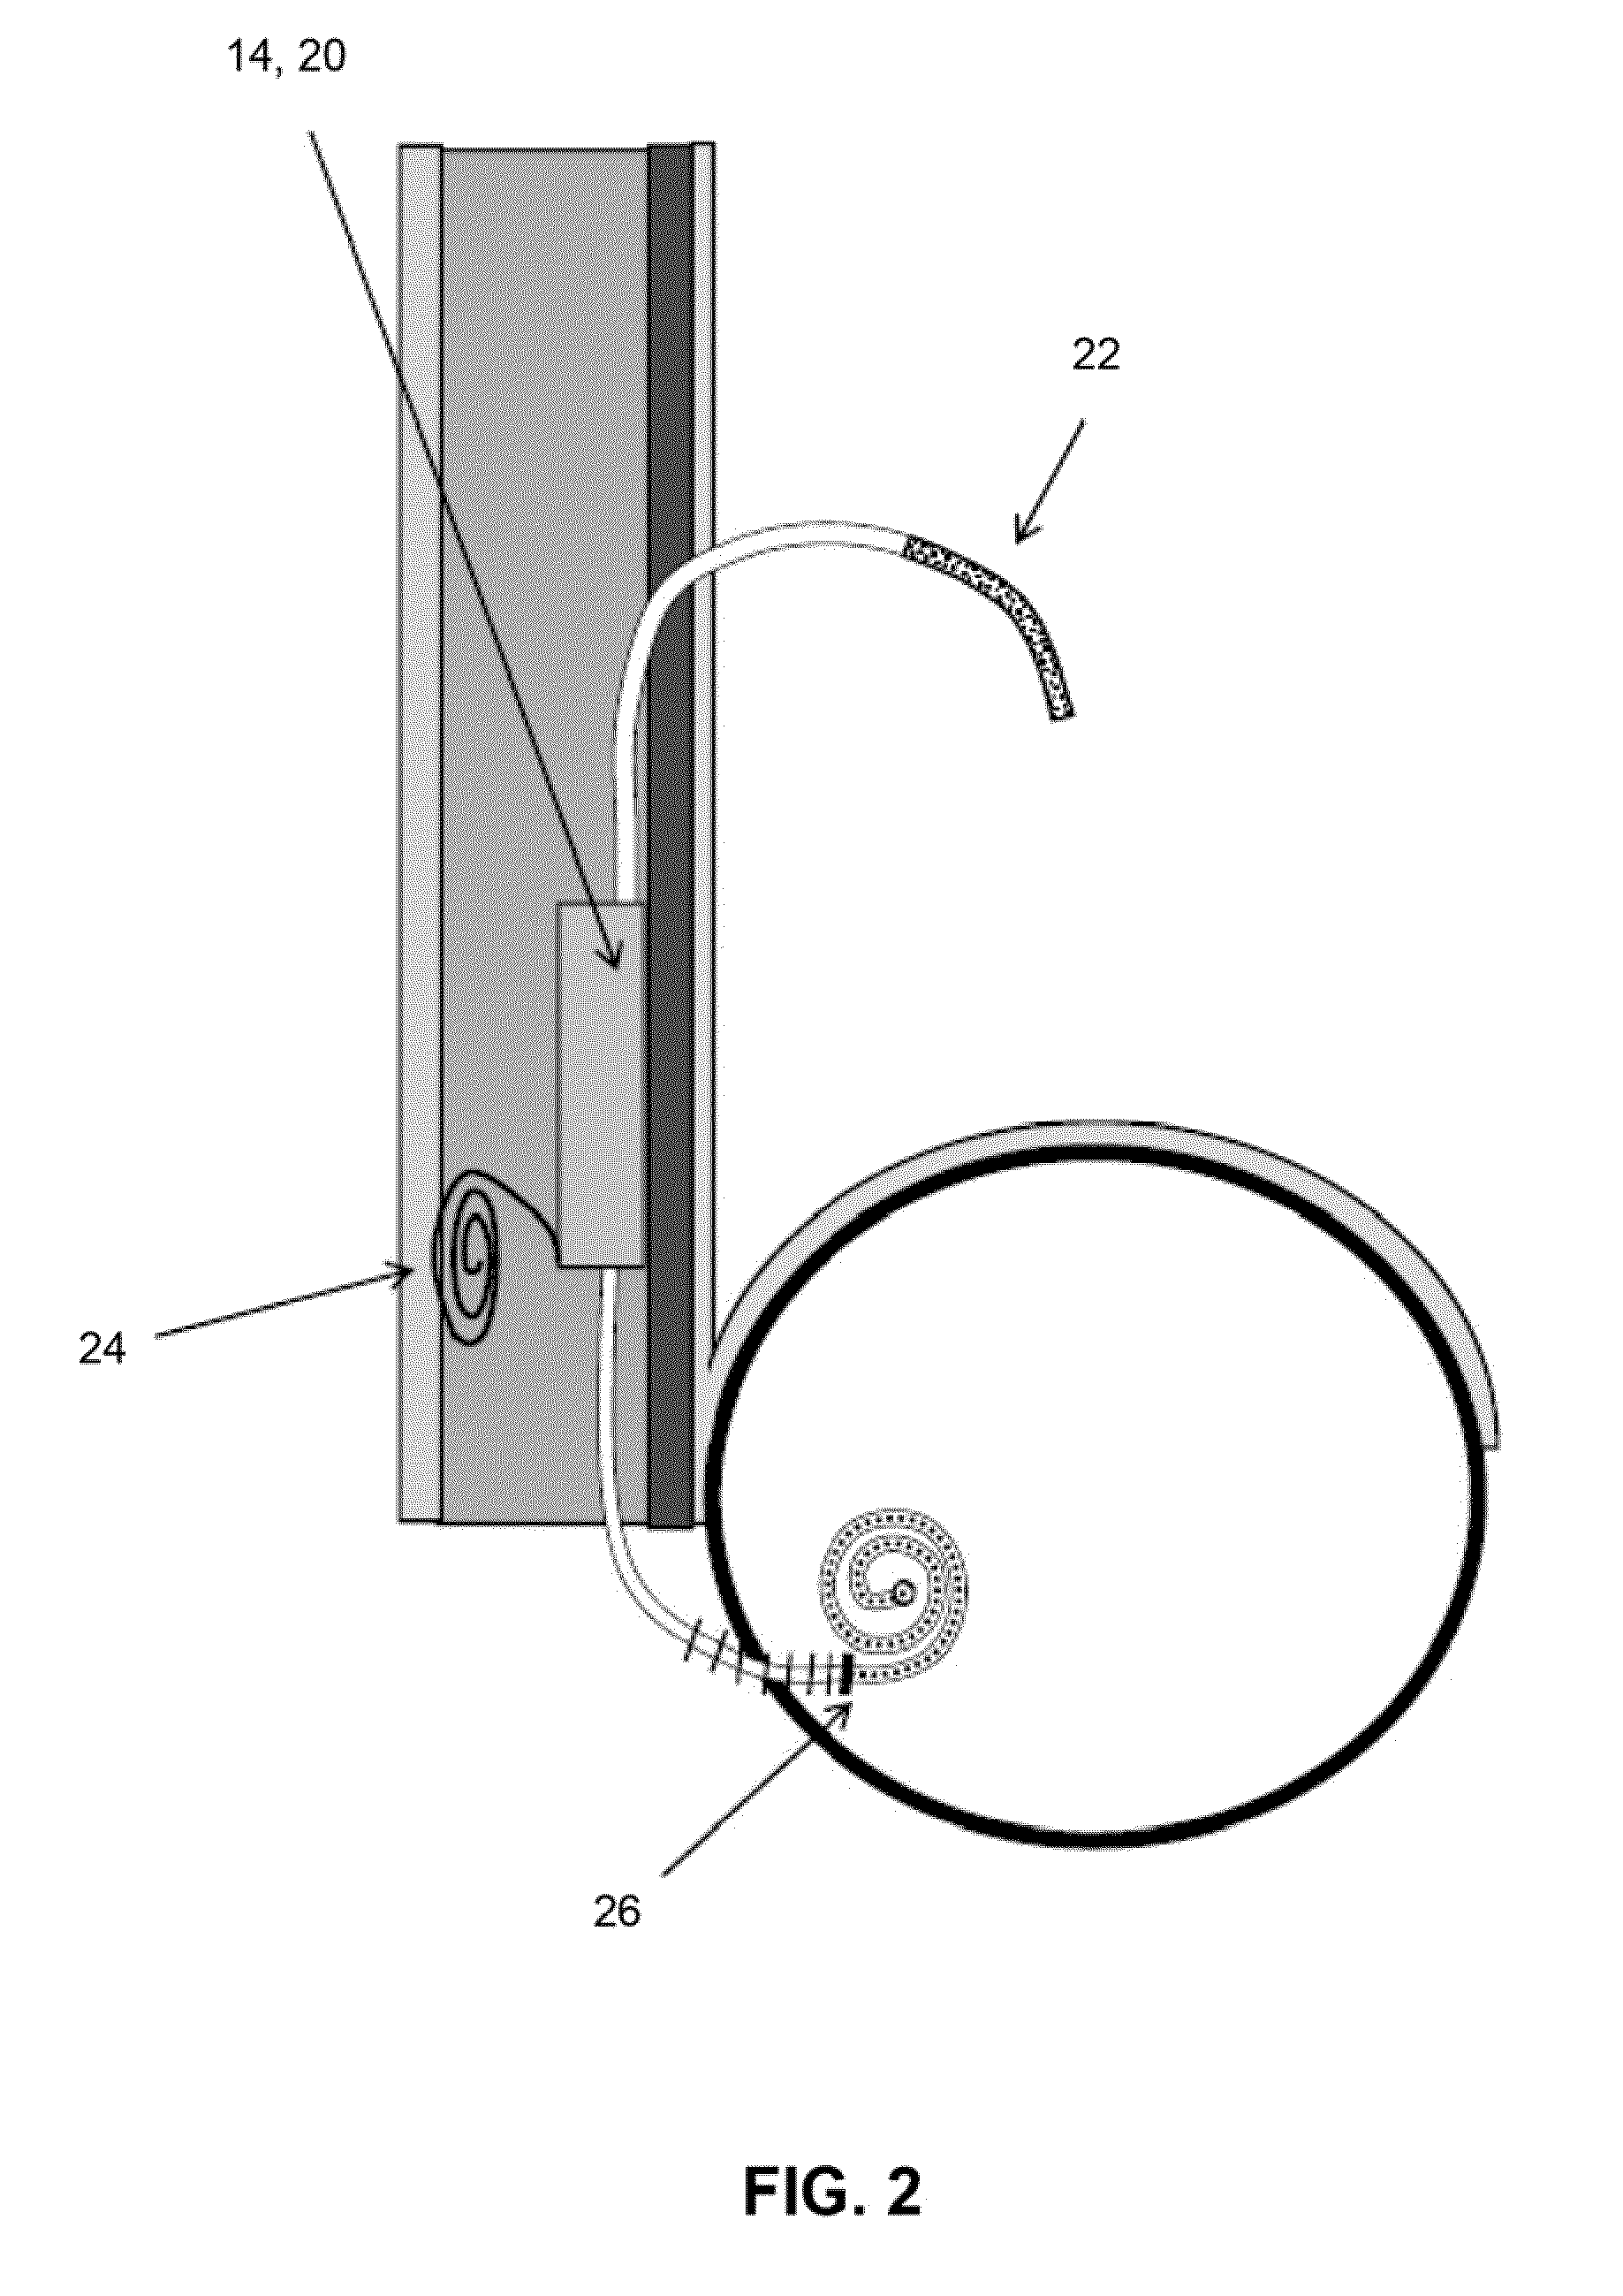 Method and apparatus for automated active sterilization of fully implanted devices